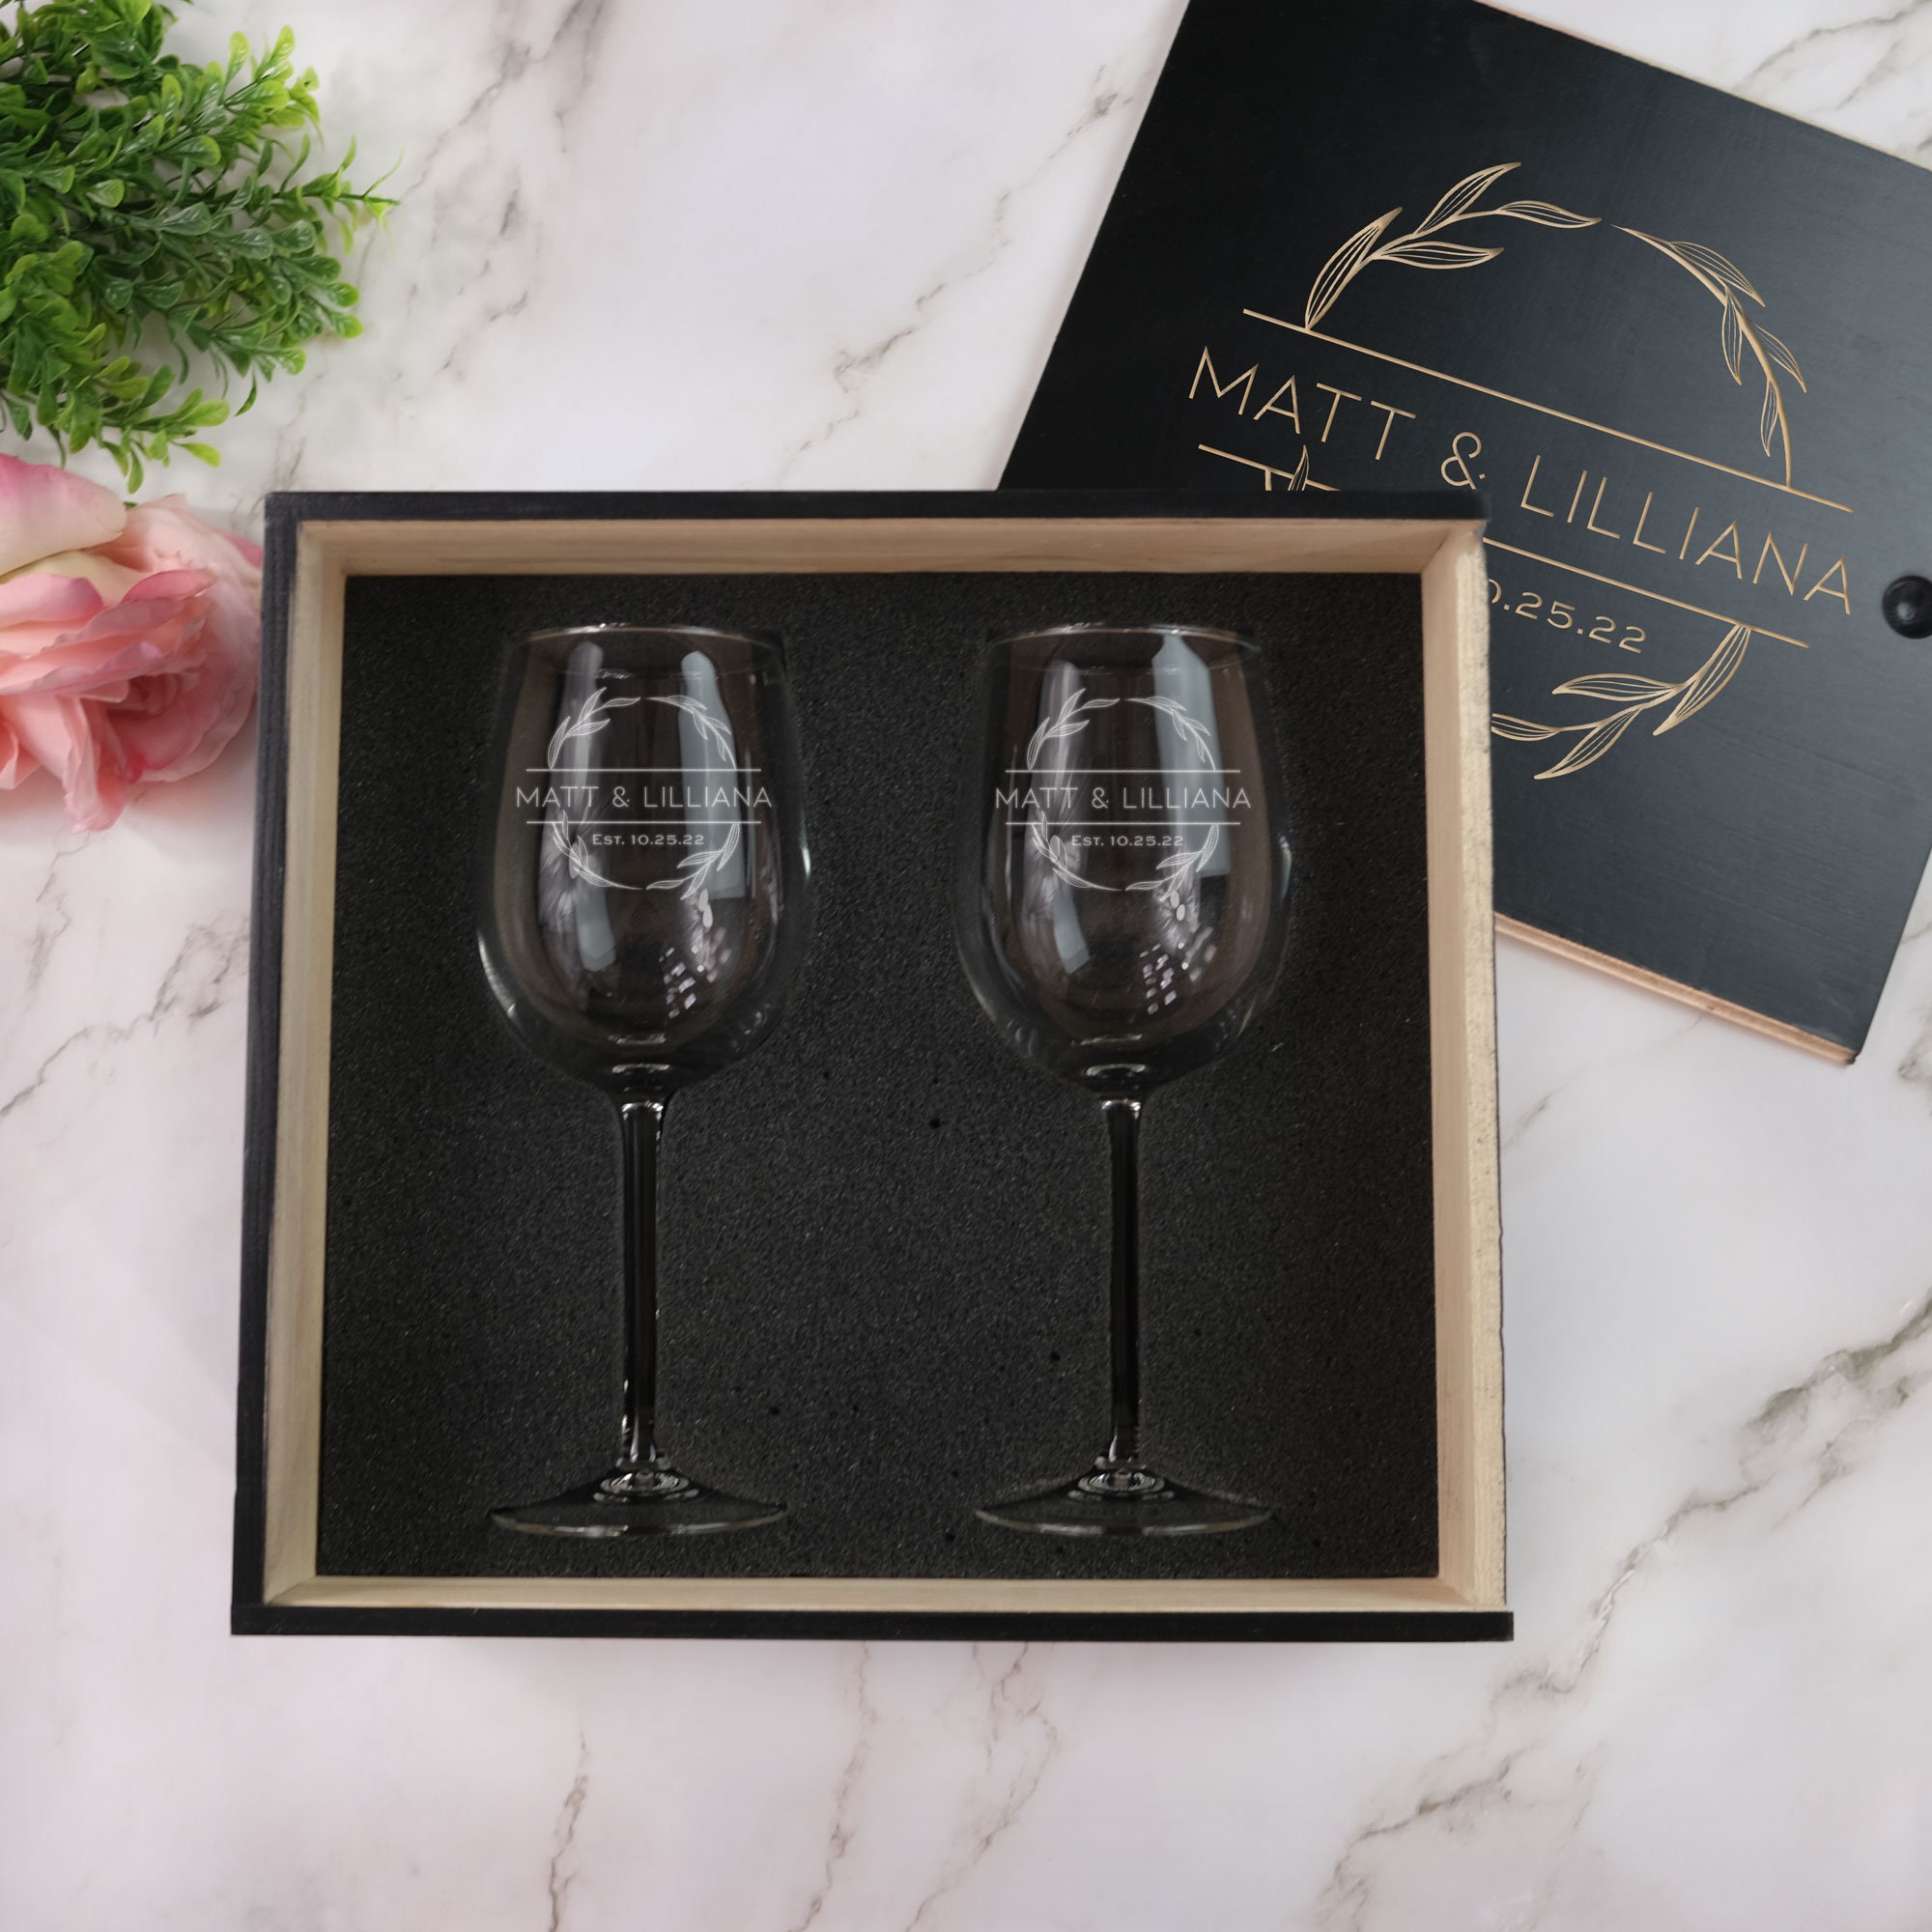 ELEPHANT GIFT, Stemmed Wine Glass, With Etched Glass Design